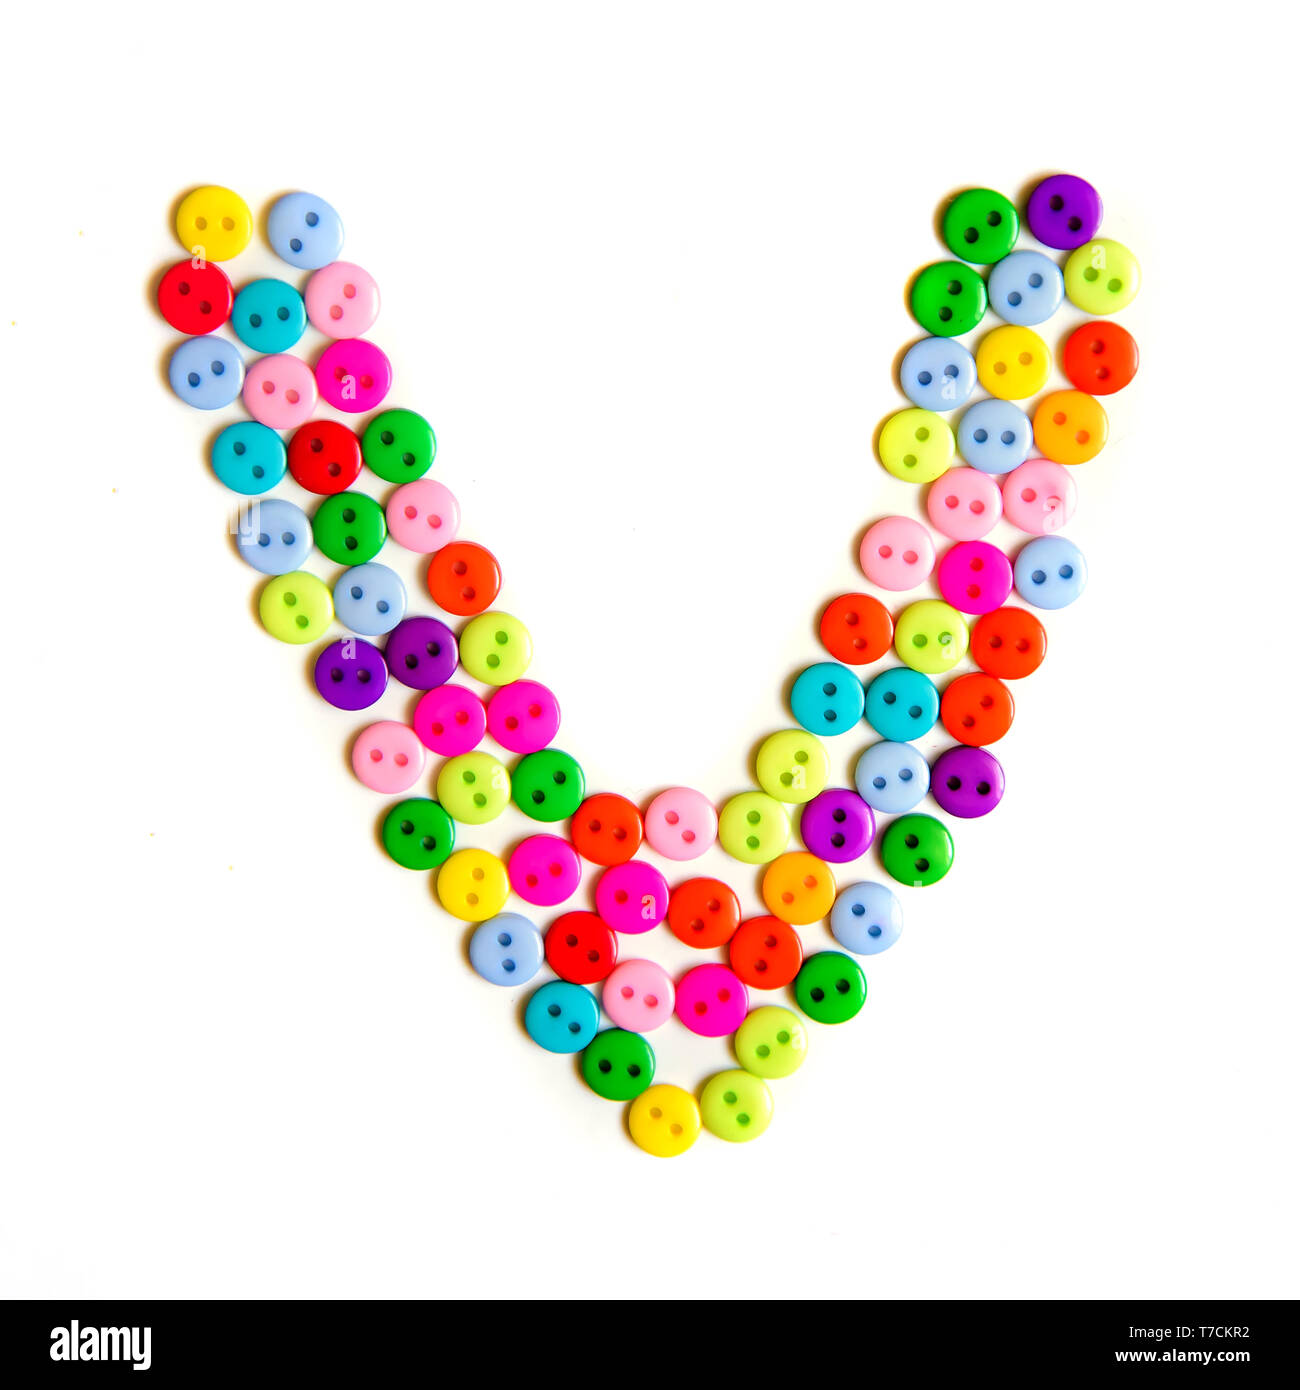 Letter V of the English alphabet from a group of colorful small buttons on a white background Stock Photo